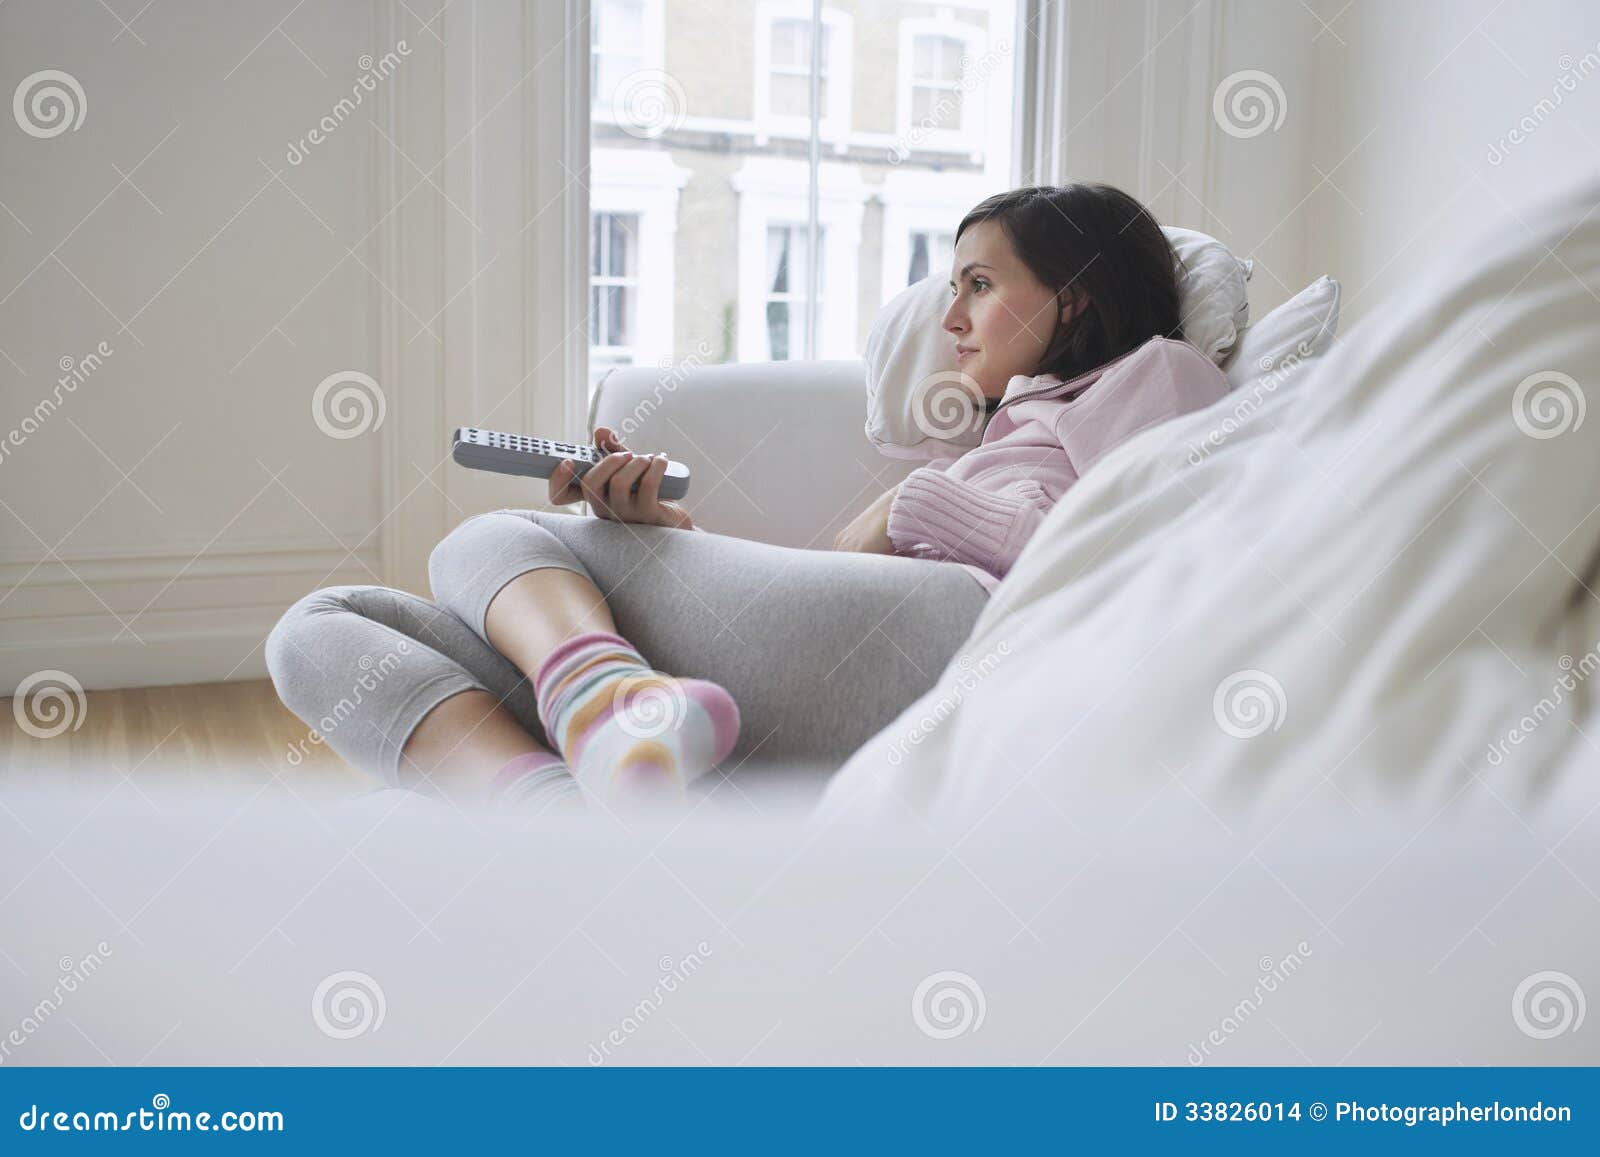 woman on couch and watching tv